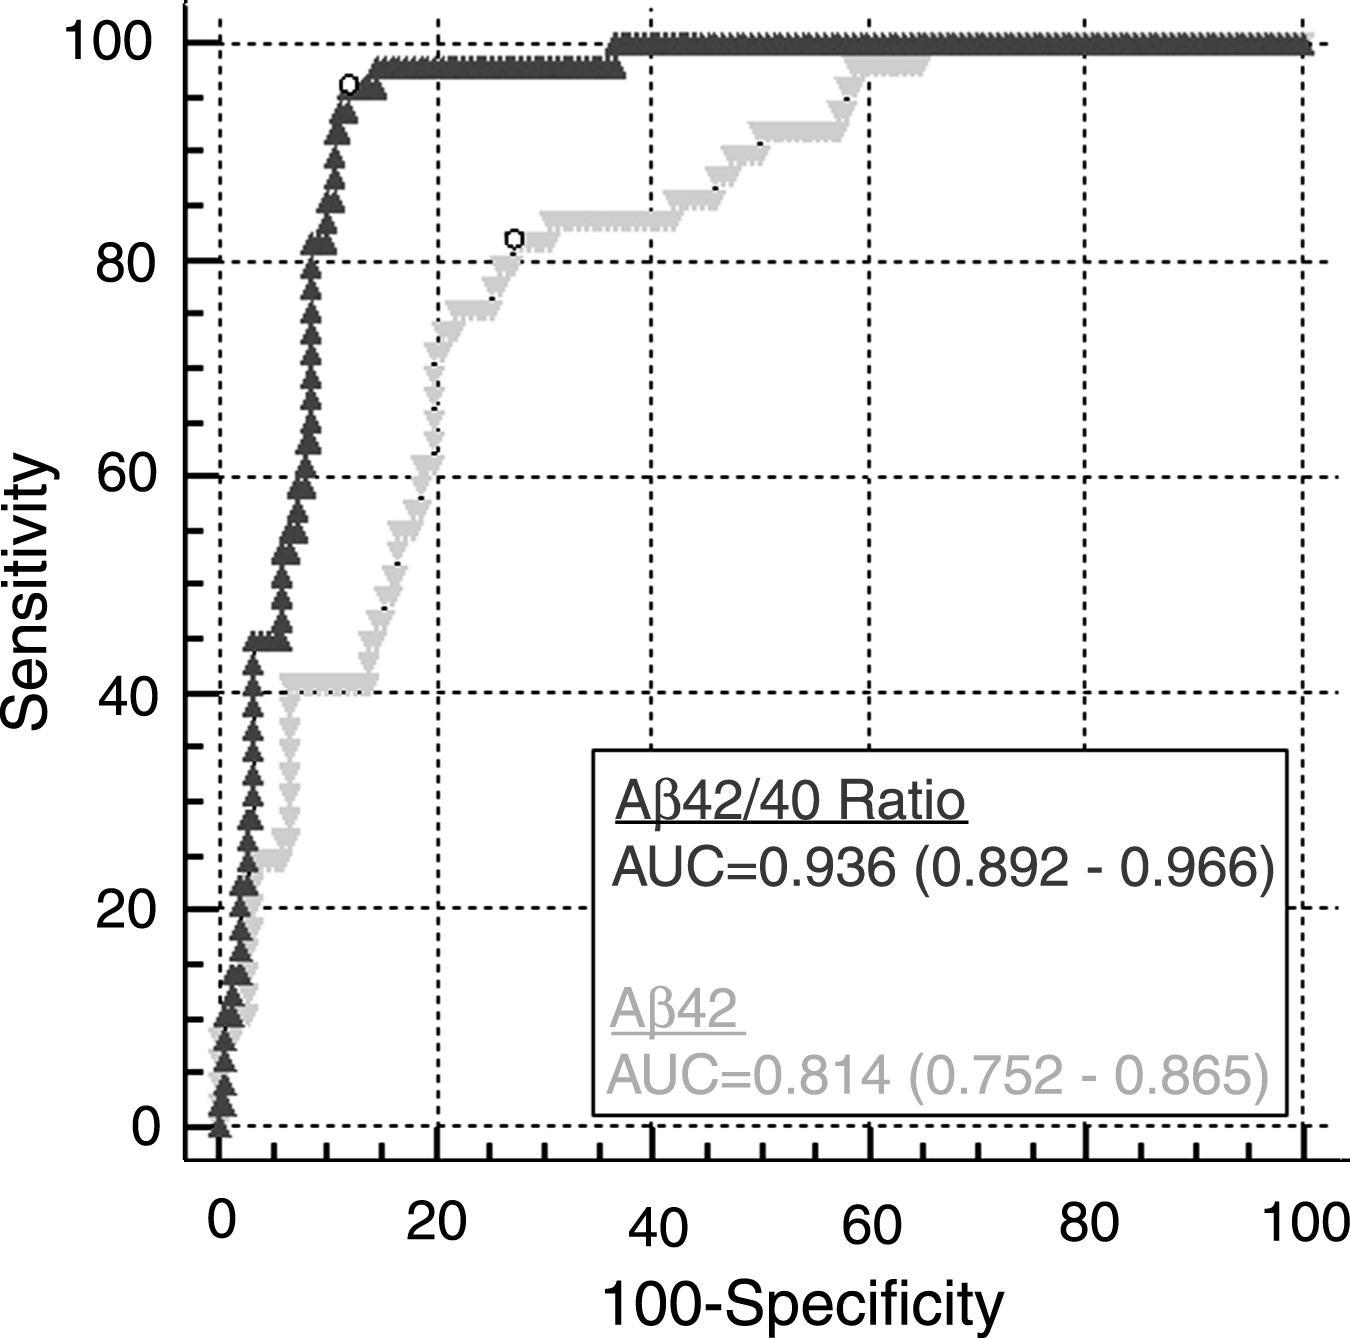 Receiver operating characteristic (ROC) curves of the CSF Aβ42 concentration and Aβ42/40 ratio. Values for areas under the ROC curves (AUC) correspond to mean±95% CI. Open circles represent the combinations of the sensitivities and the specificities at the maximal Youden Indices.